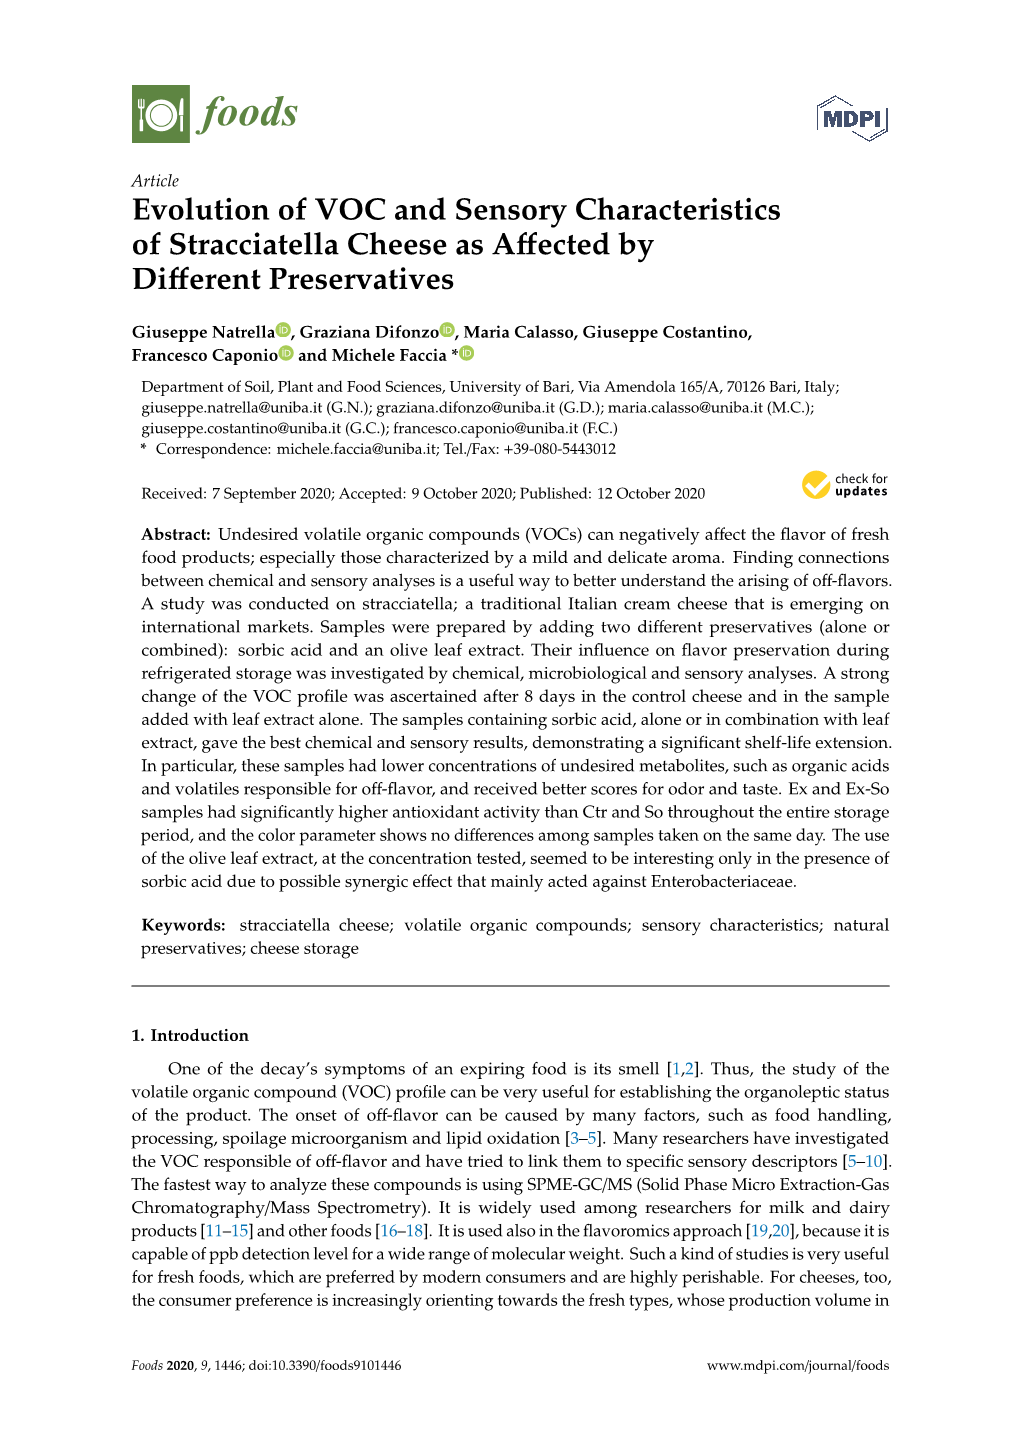 Evolution of VOC and Sensory Characteristics of Stracciatella Cheese As Aﬀected by Diﬀerent Preservatives